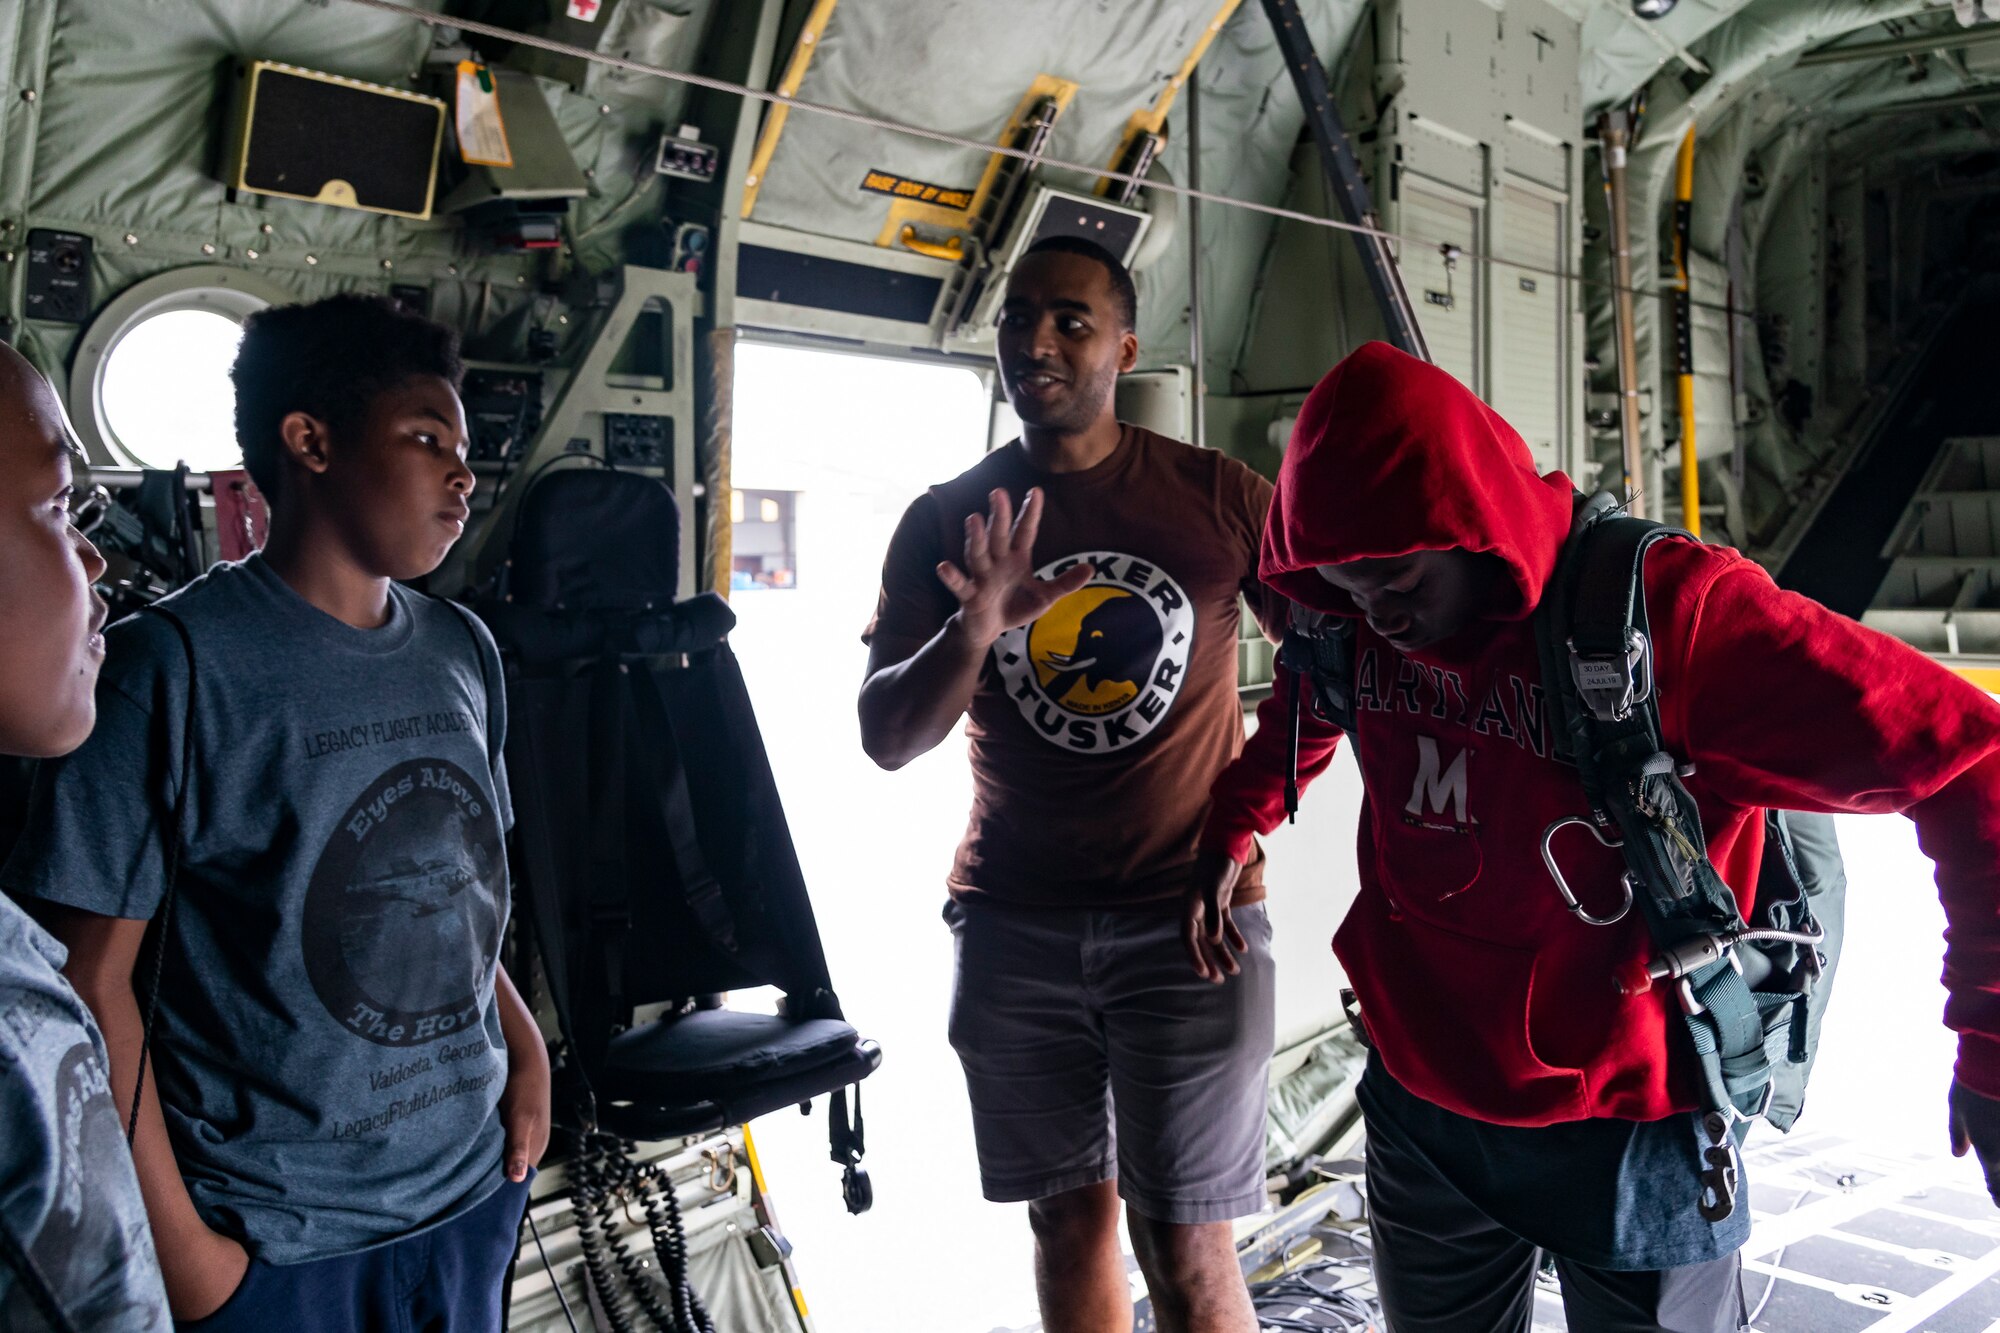 A participant tries on a parachute during the Eyes Above the Horizon diversity outreach program, July 13, 2019, in Valdosta, Ga. The Valdosta Regional Airport hosted the Legacy Flight Academy and over 60 youths ranging in age from 10-19 for a day of flight introduction and immersion into the legacy of the historic Tuskegee Airmen. The program is designed to remove barriers for underrepresented minorities and inspire an interest in aerospace careers. (U.S. Air Force photo by Airman 1st Class Hayden Legg)